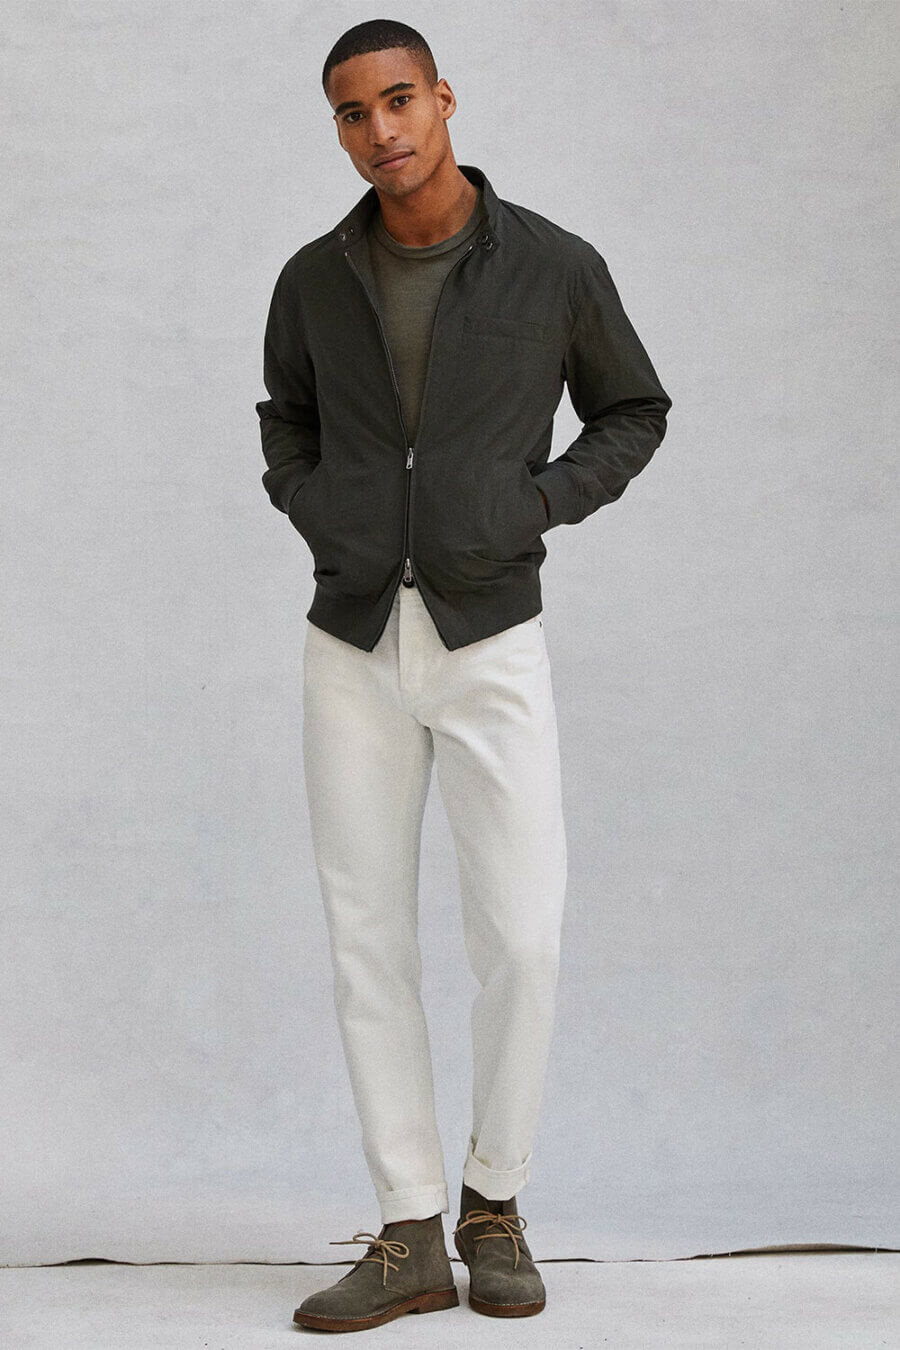 Men's white jeans and green bomber jacket outfit with suede desert boots